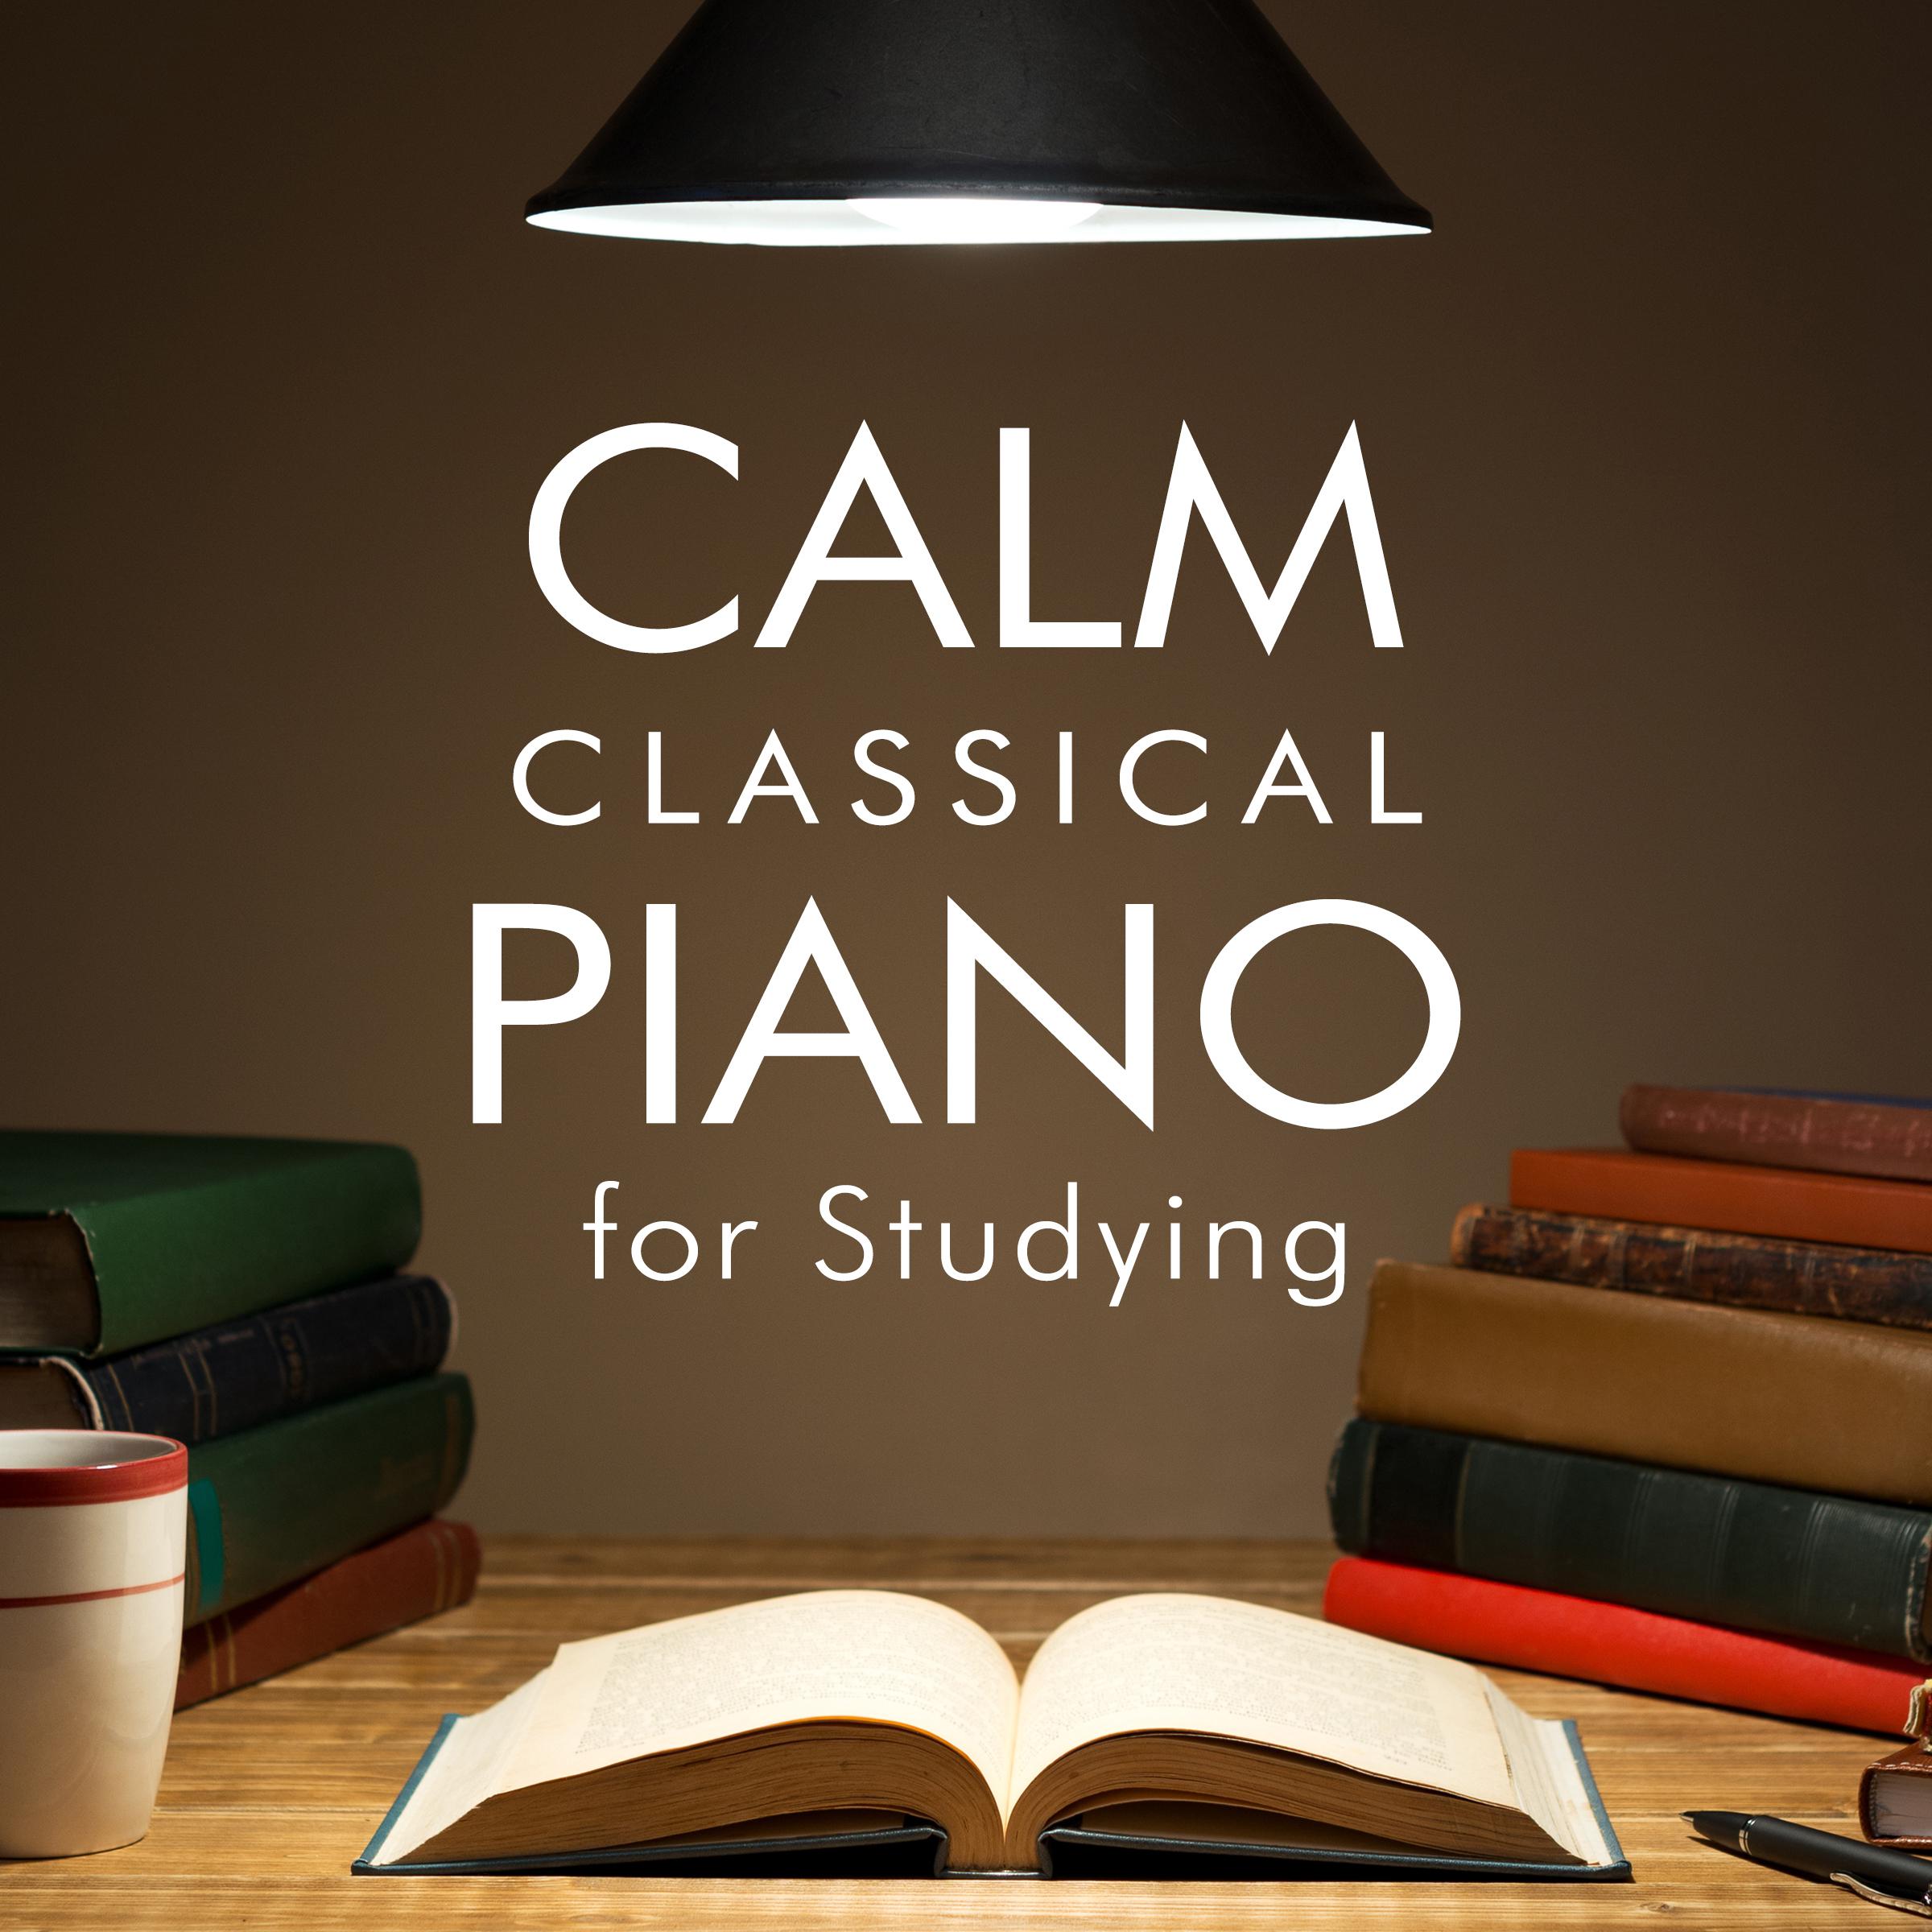 Calm Classical Piano for Studying